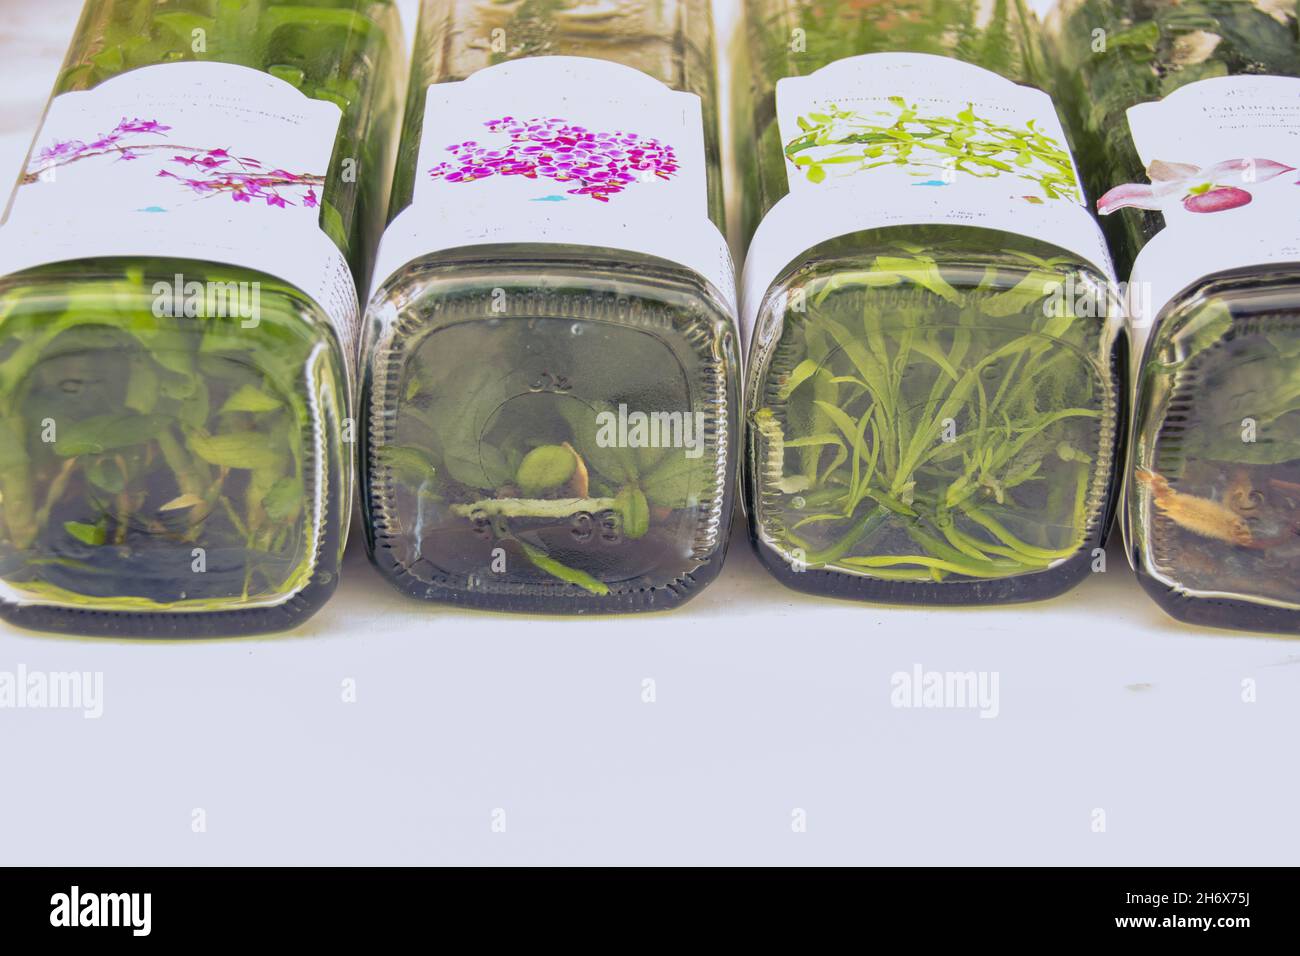 Varieties of orchid clones inside a glass bottle sold at a plant shop Stock Photo